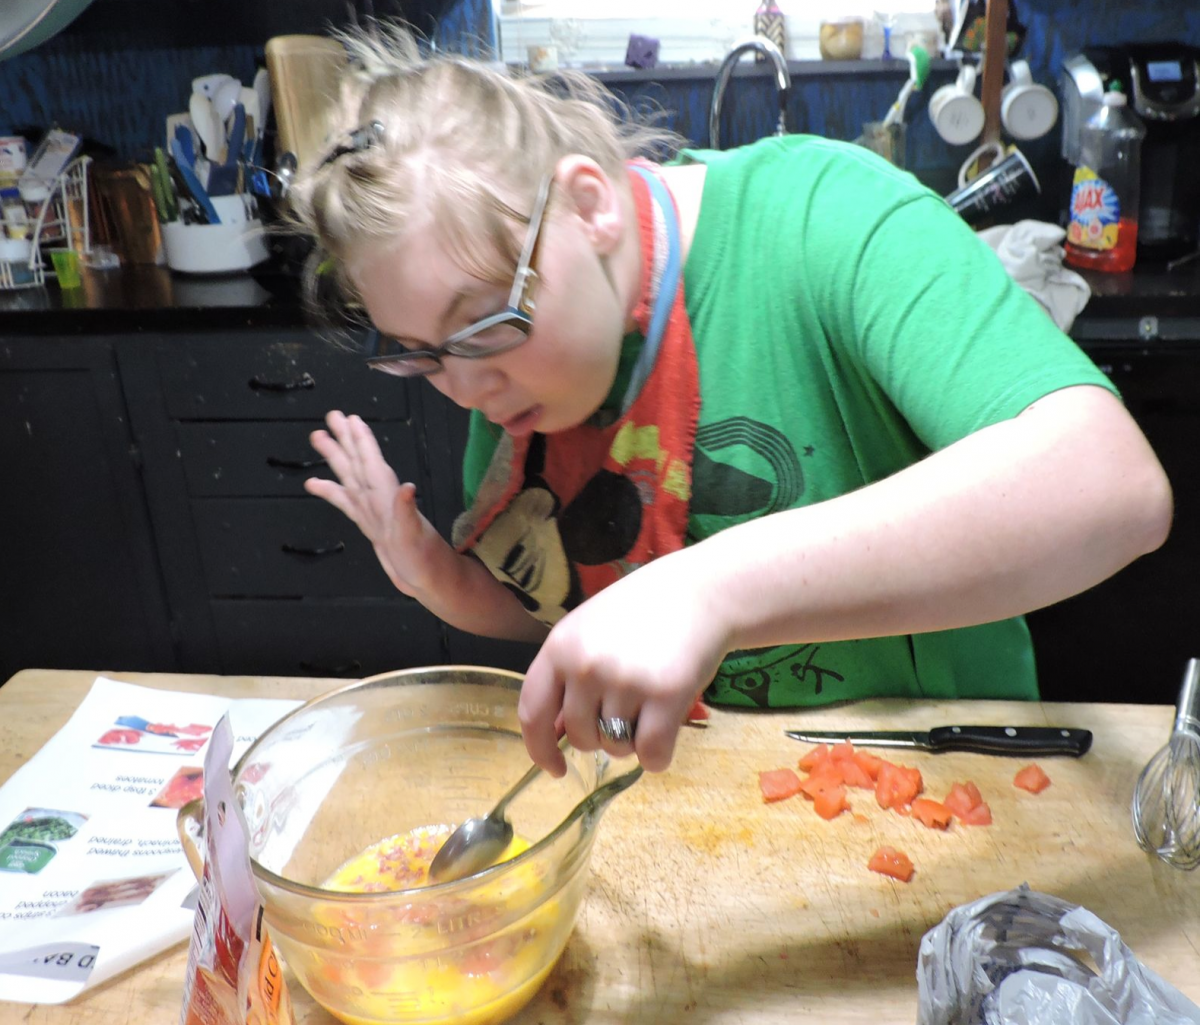 A teenage girl stirs ingredients in a mixing bowl